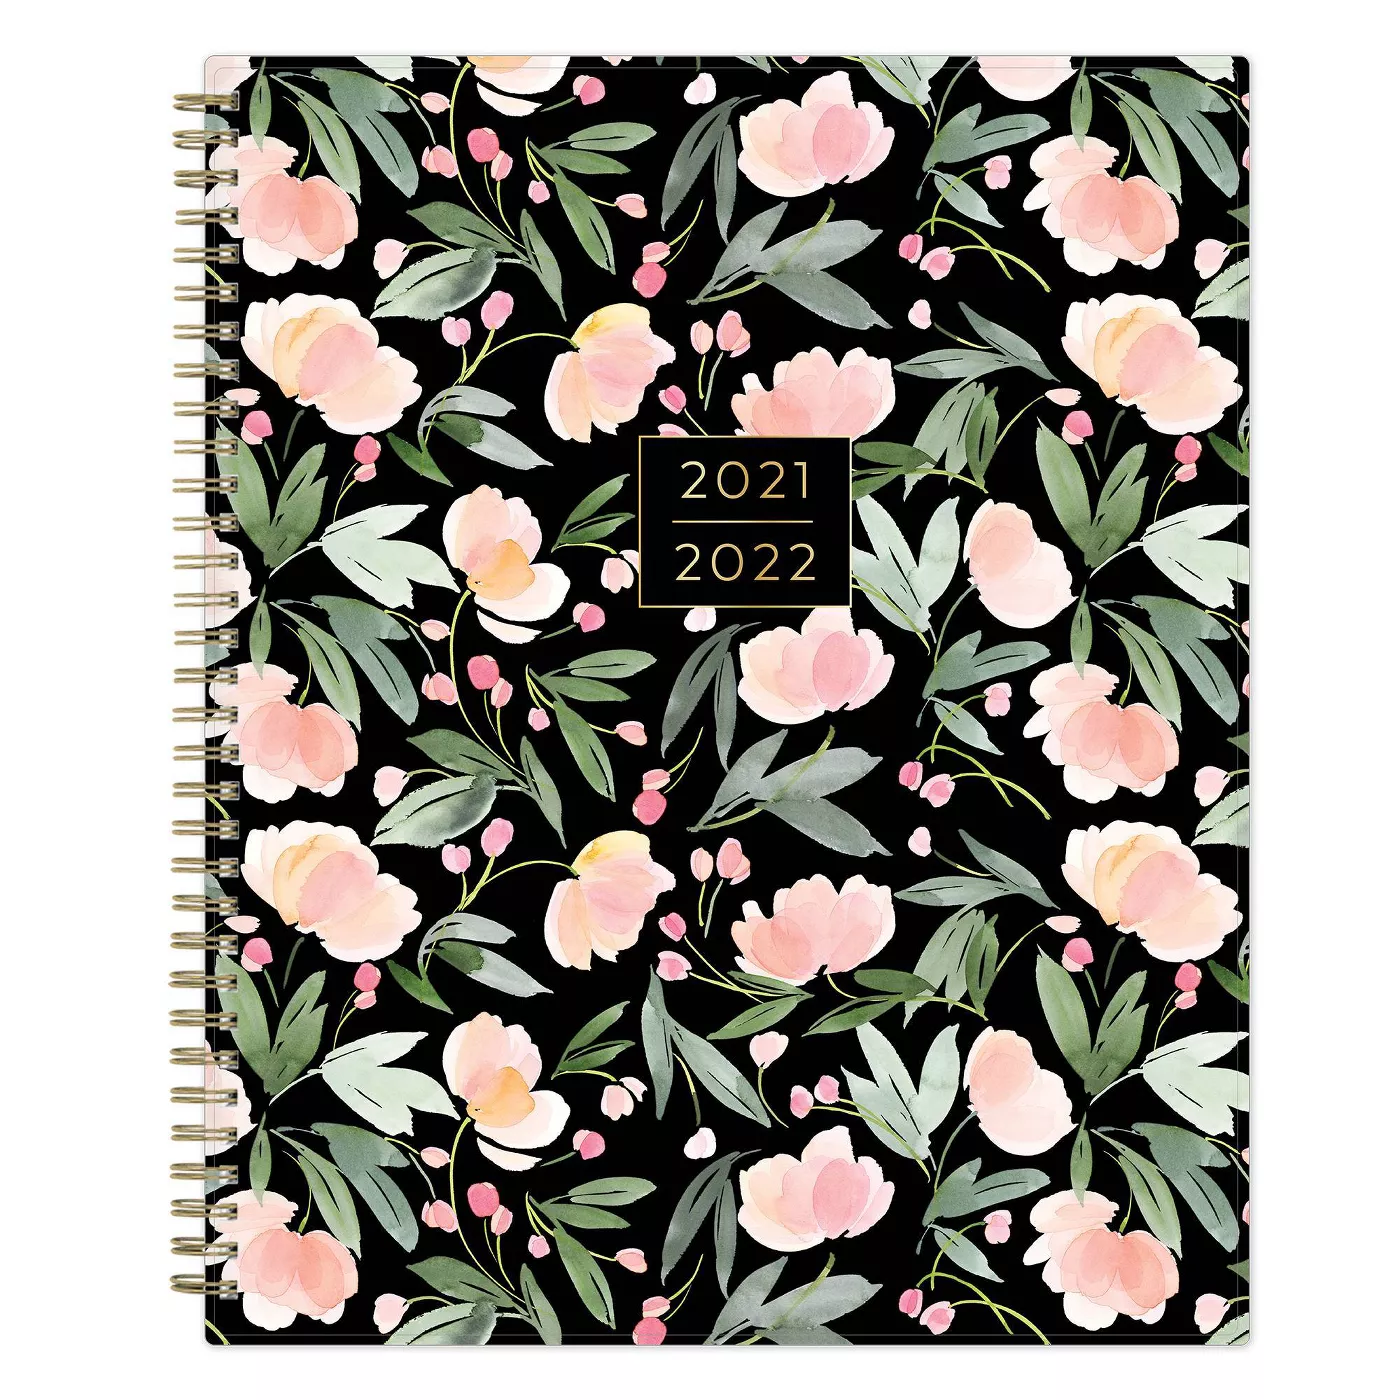 2021-22 Academic Weekly/Monthly Planner 8.5" x 11" Soft Blooms Dark - Yao Cheng - image 1 of 13